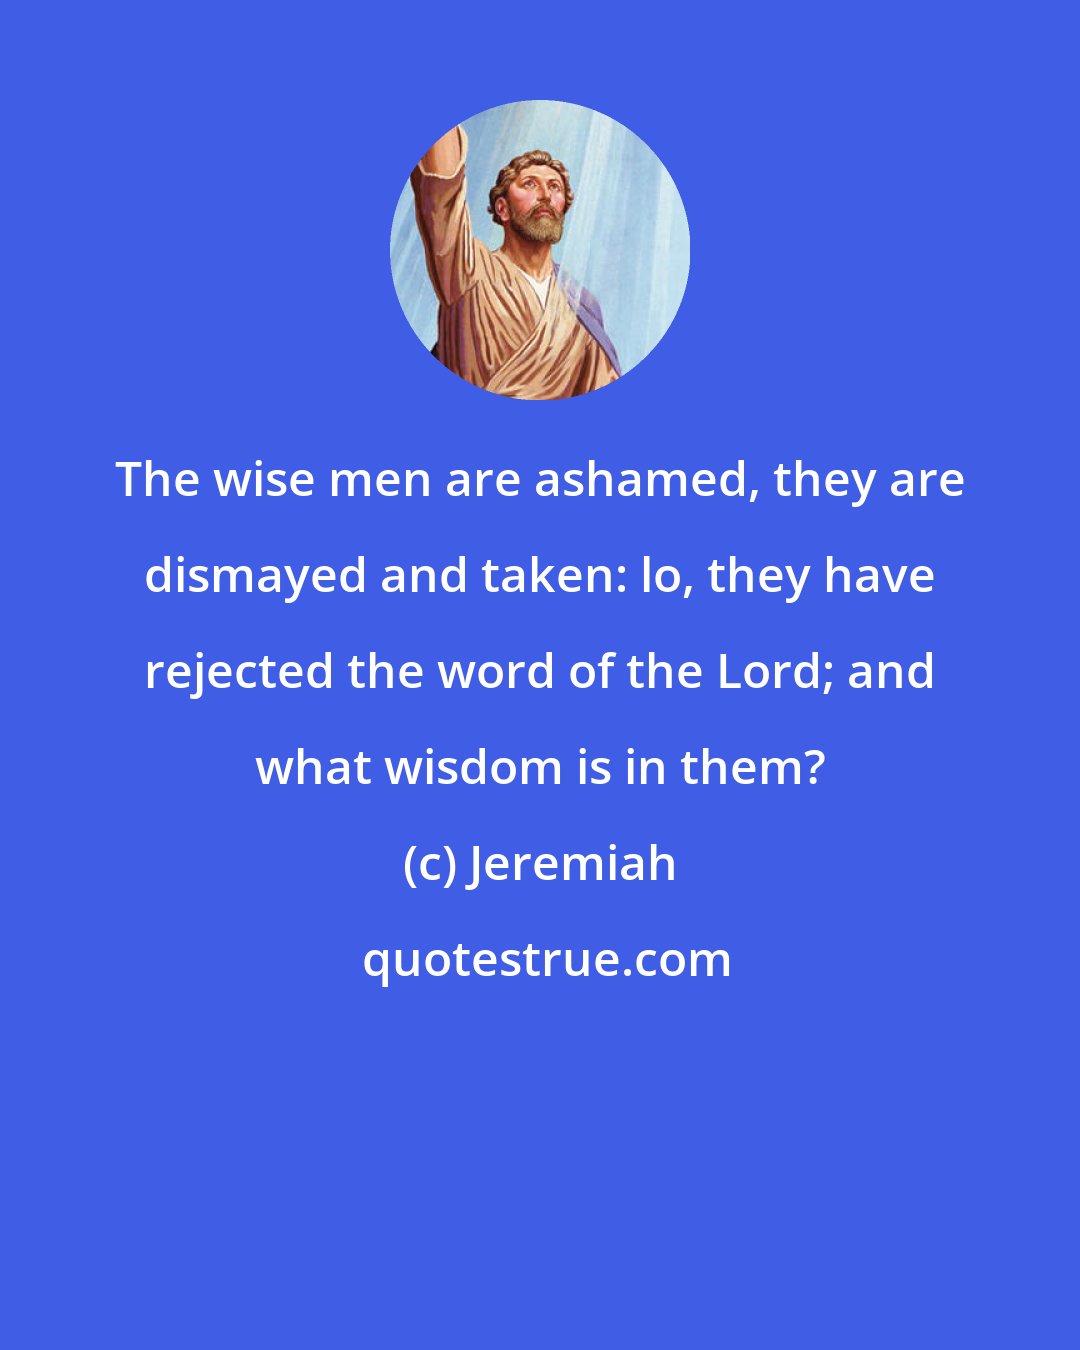 Jeremiah: The wise men are ashamed, they are dismayed and taken: lo, they have rejected the word of the Lord; and what wisdom is in them?